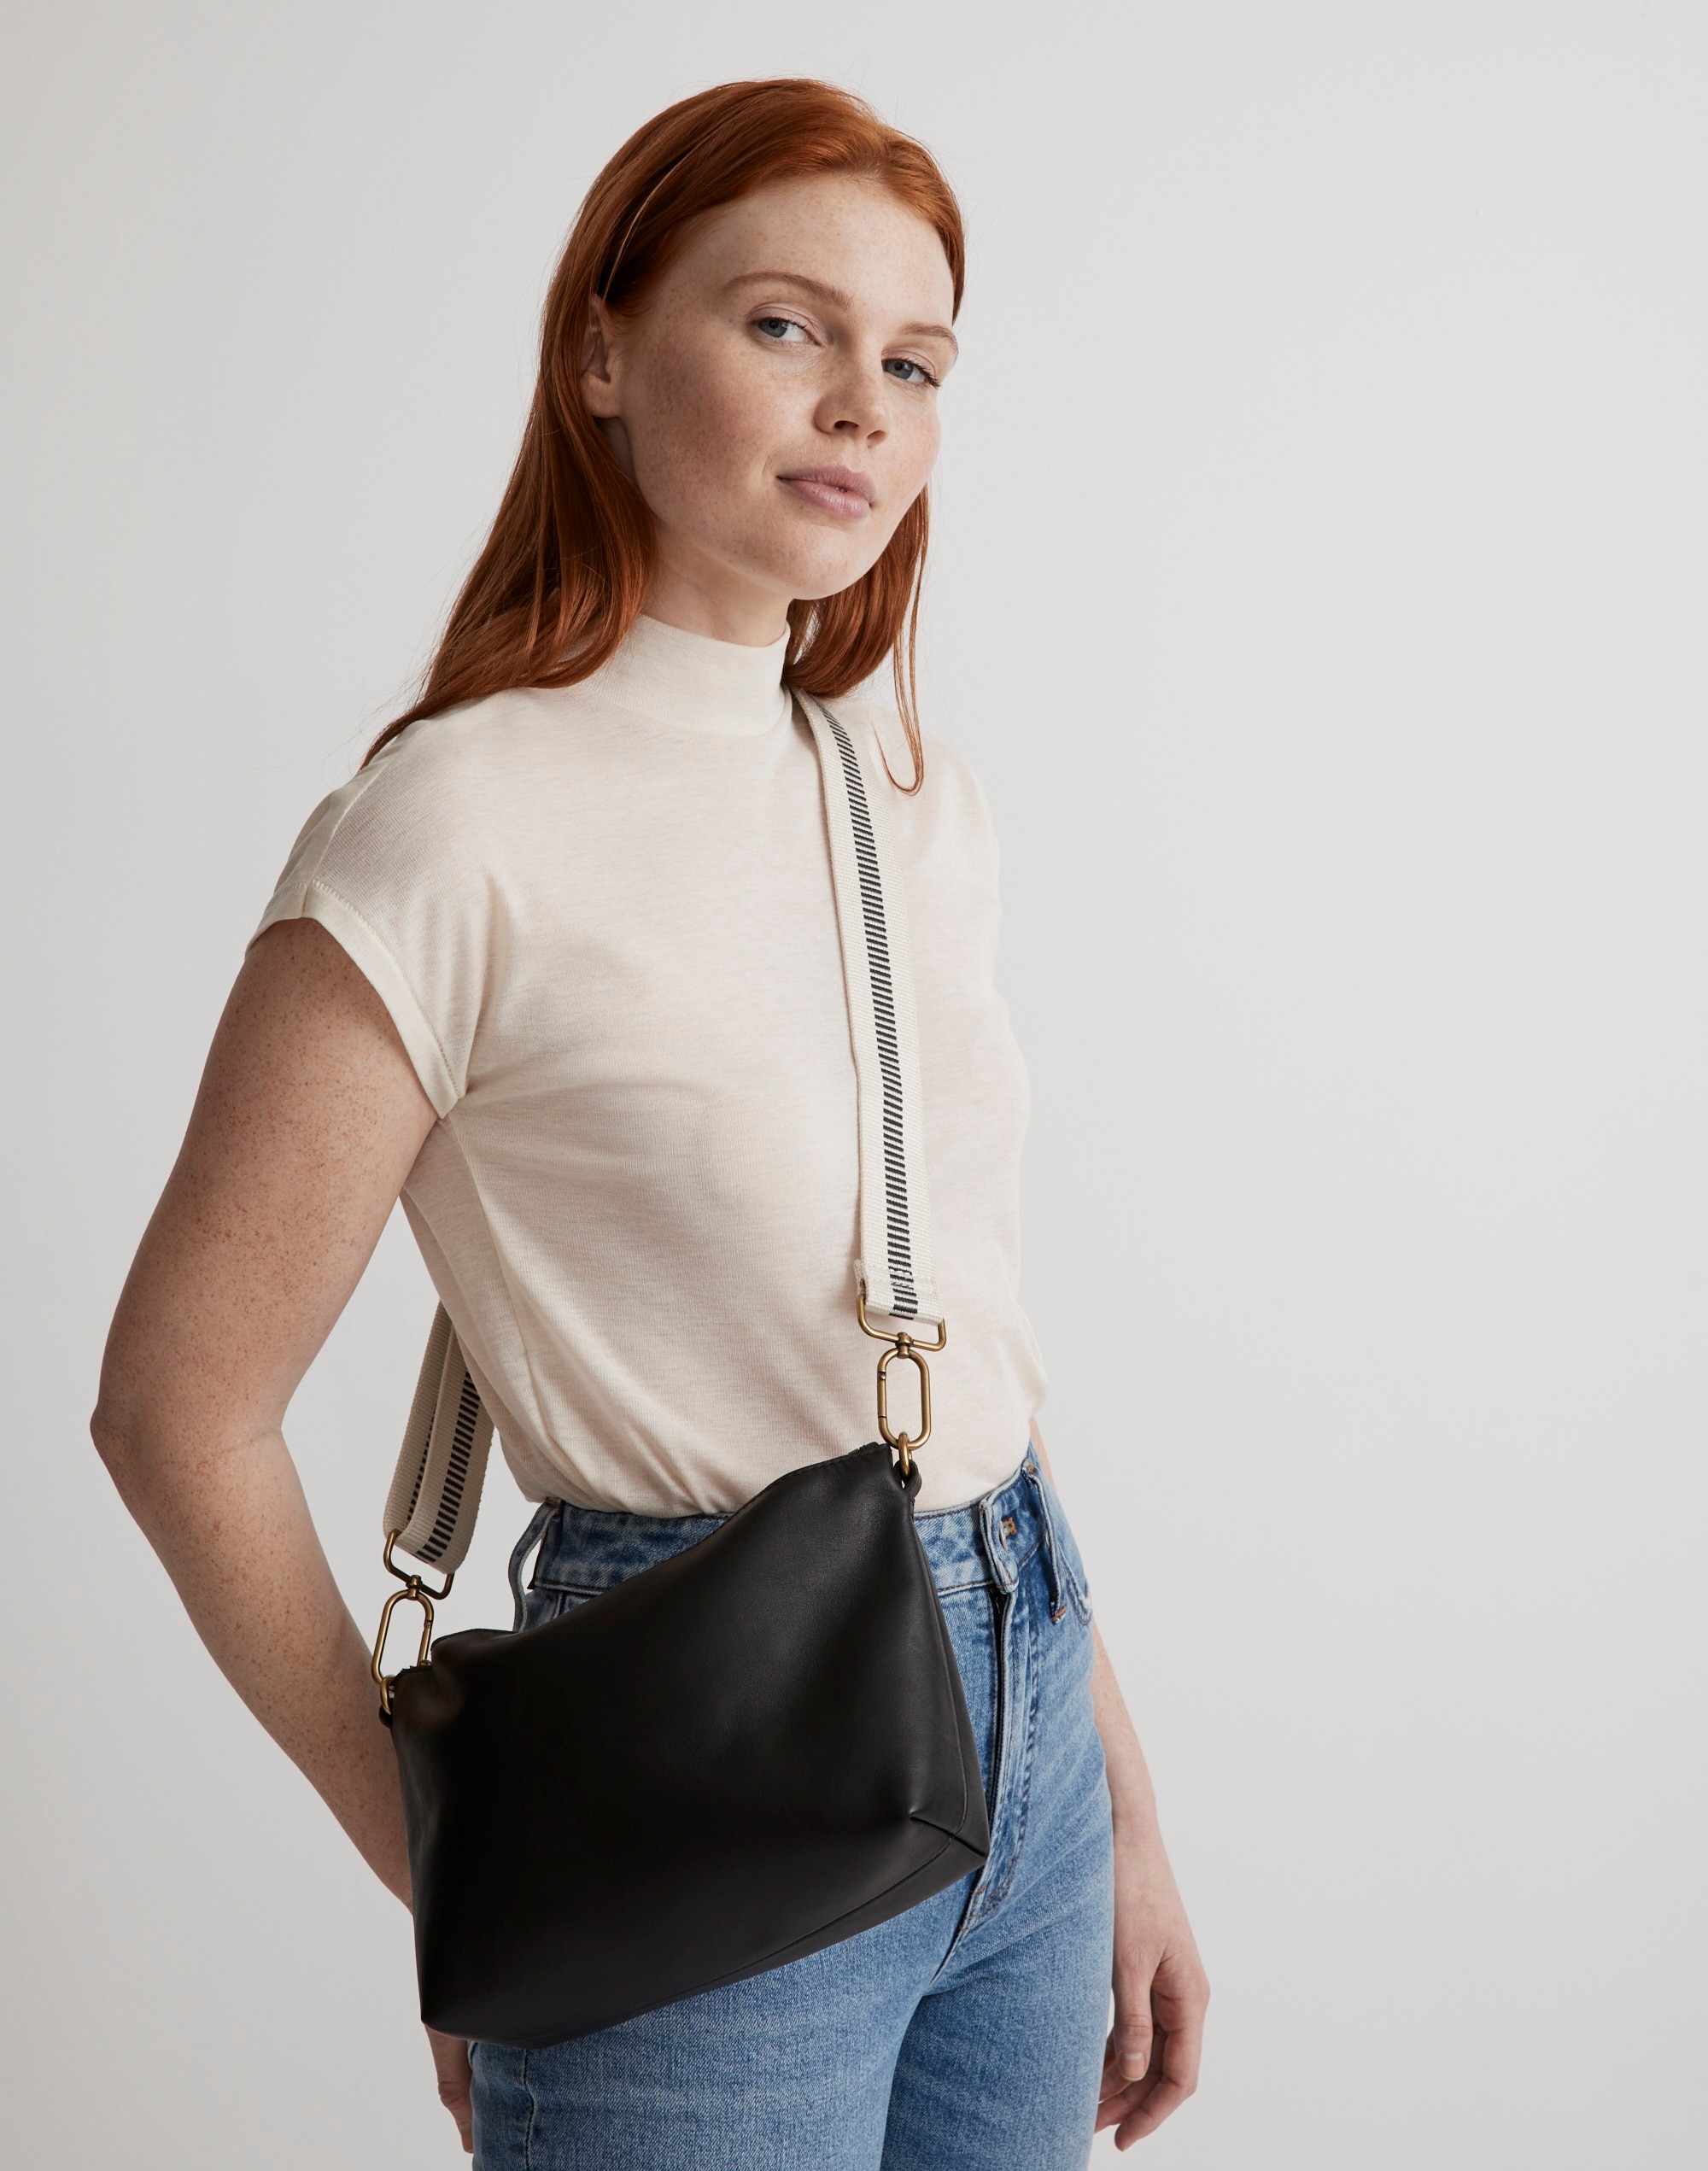 The Leather Carabiner Crossbody Sling Bag